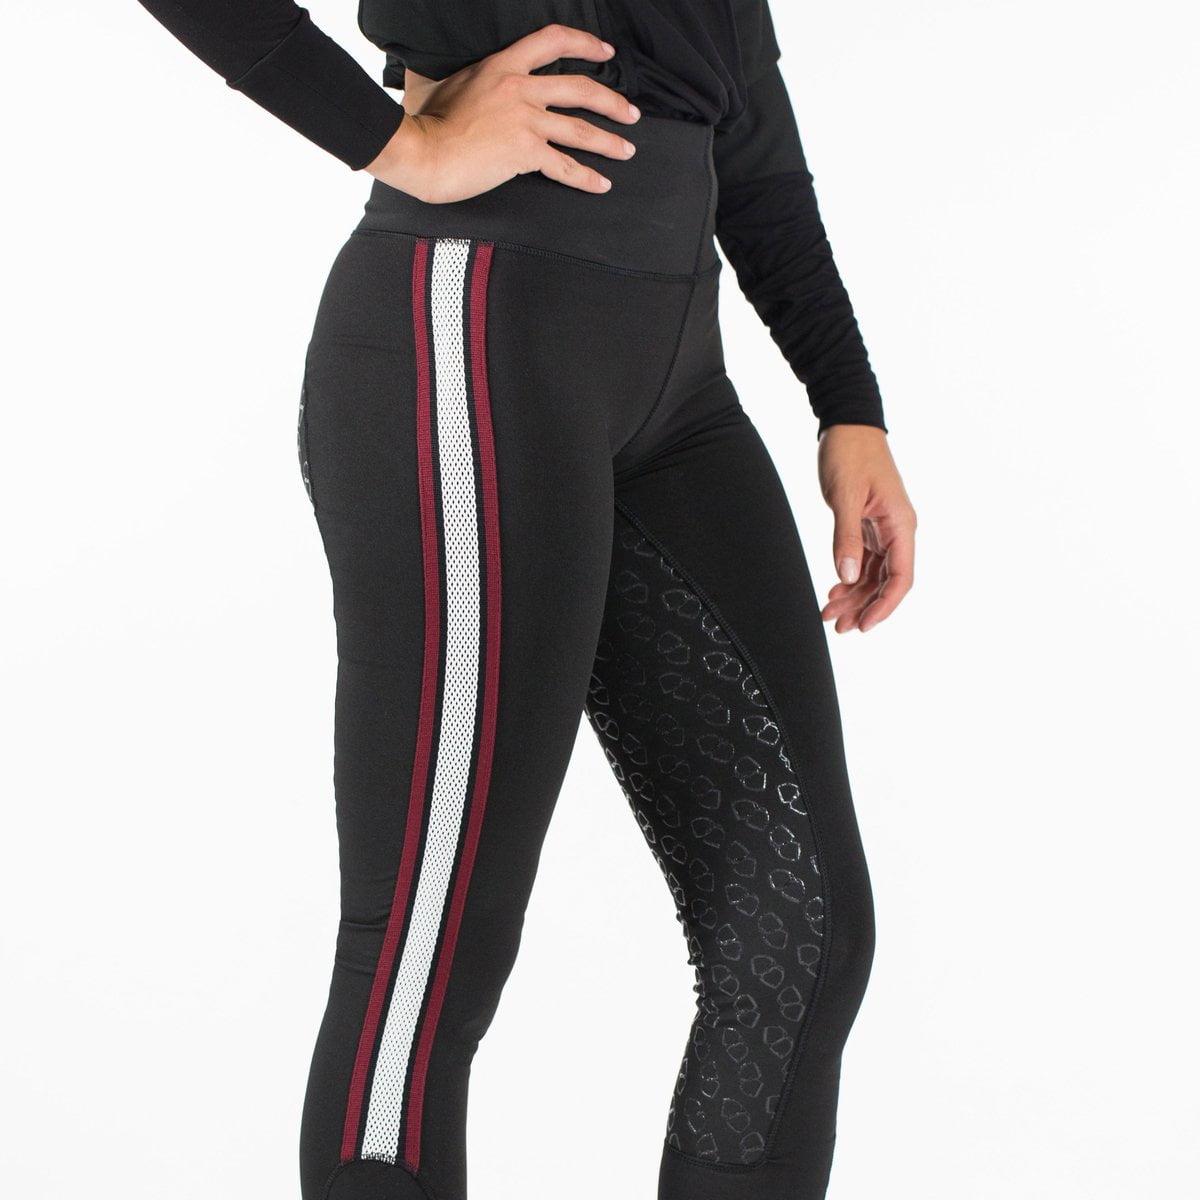 Horze Trixie Full Seat Tights - The Connected Rider San Antonio